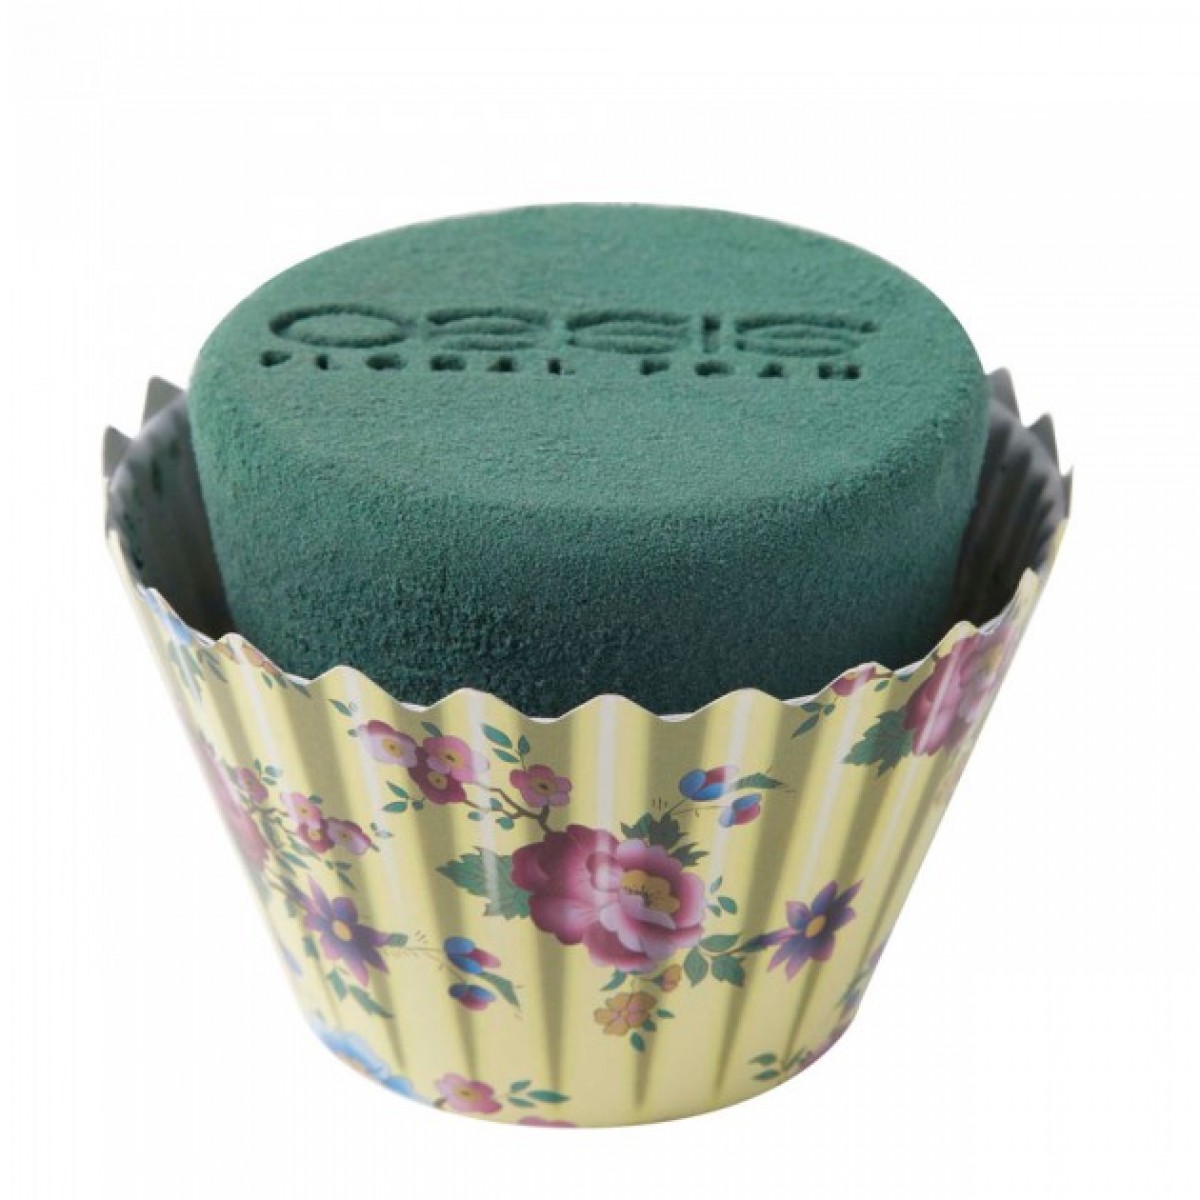 Cupcake 120mm (1 No) Oasis Floral Foam Shape With Skirt